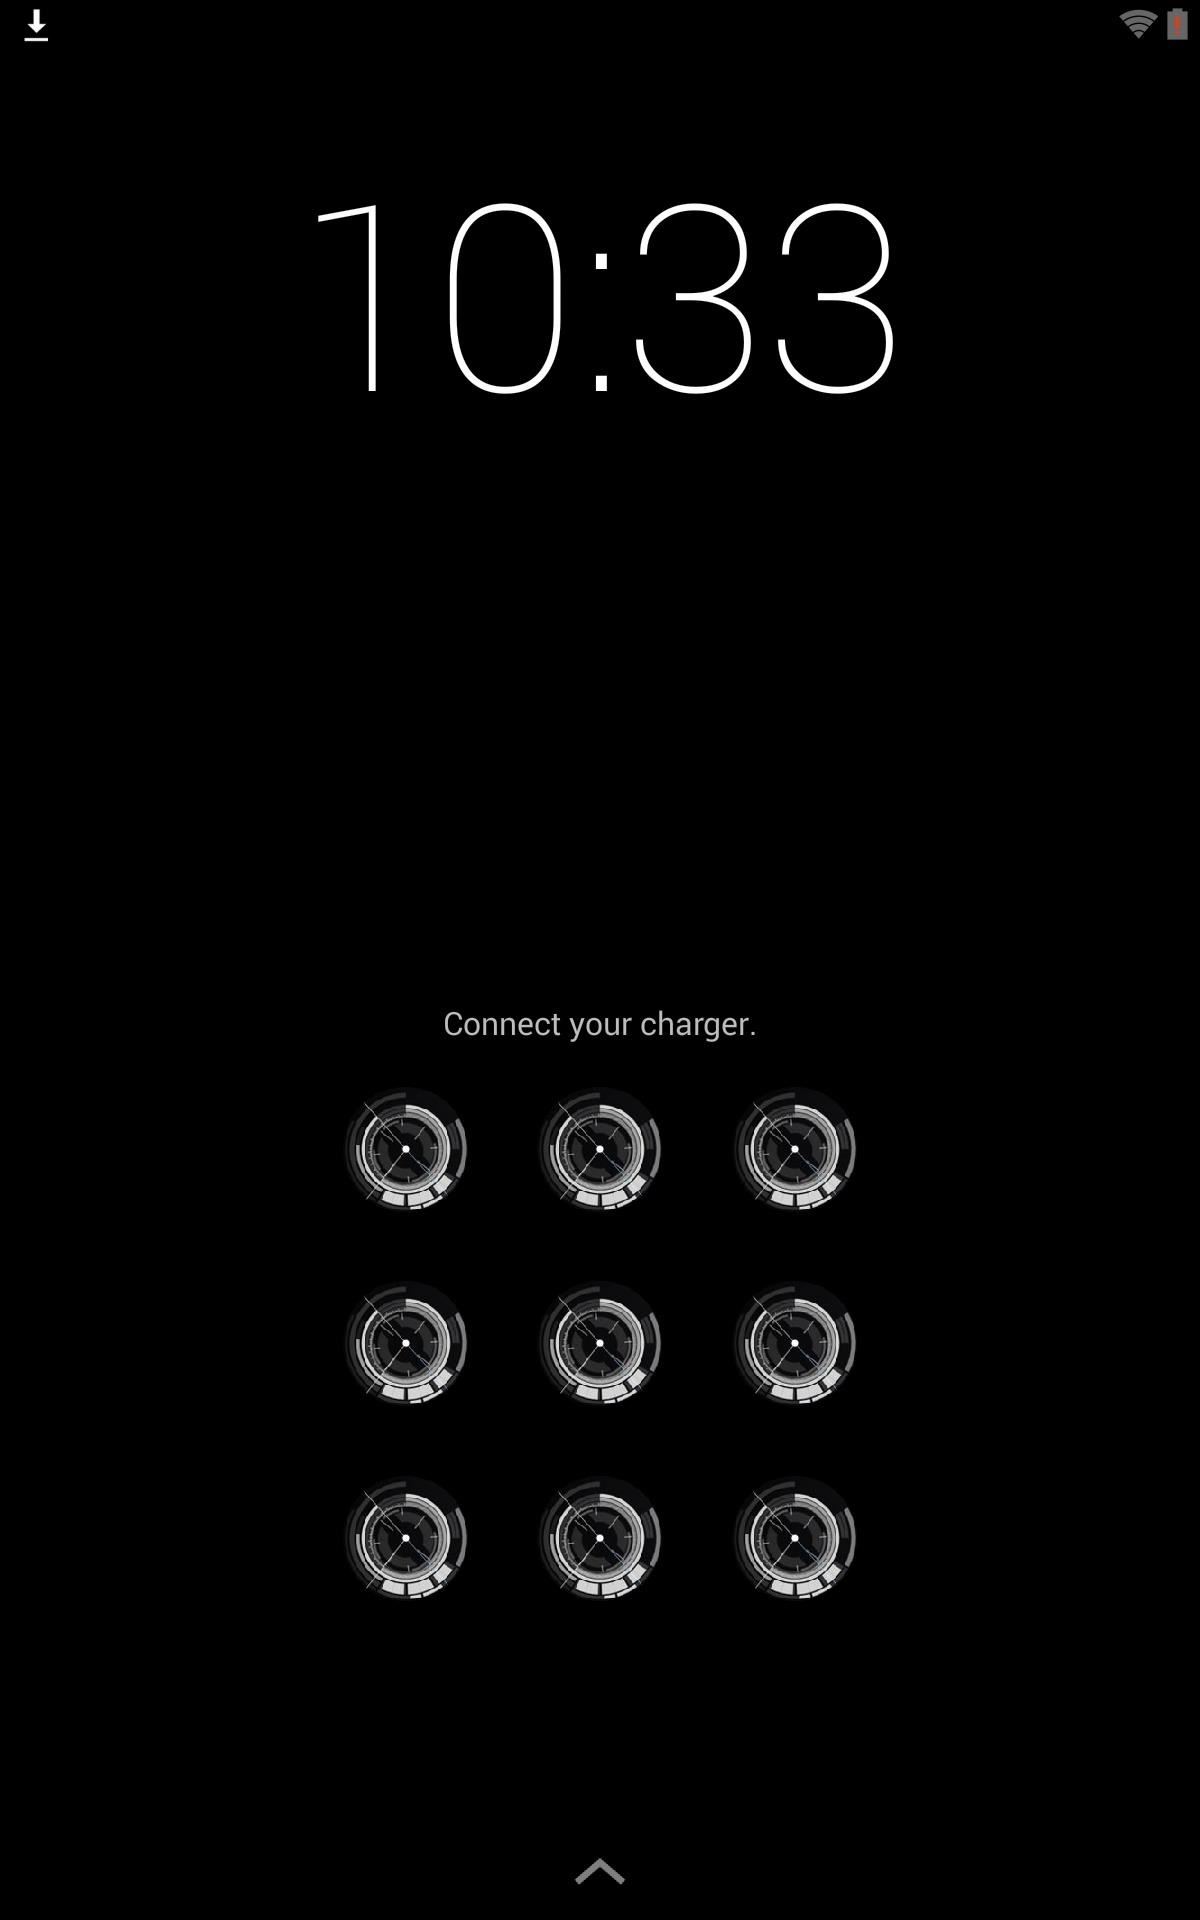 How to Theme the Pattern Unlock Screen on Your Nexus 7 with Custom Icons